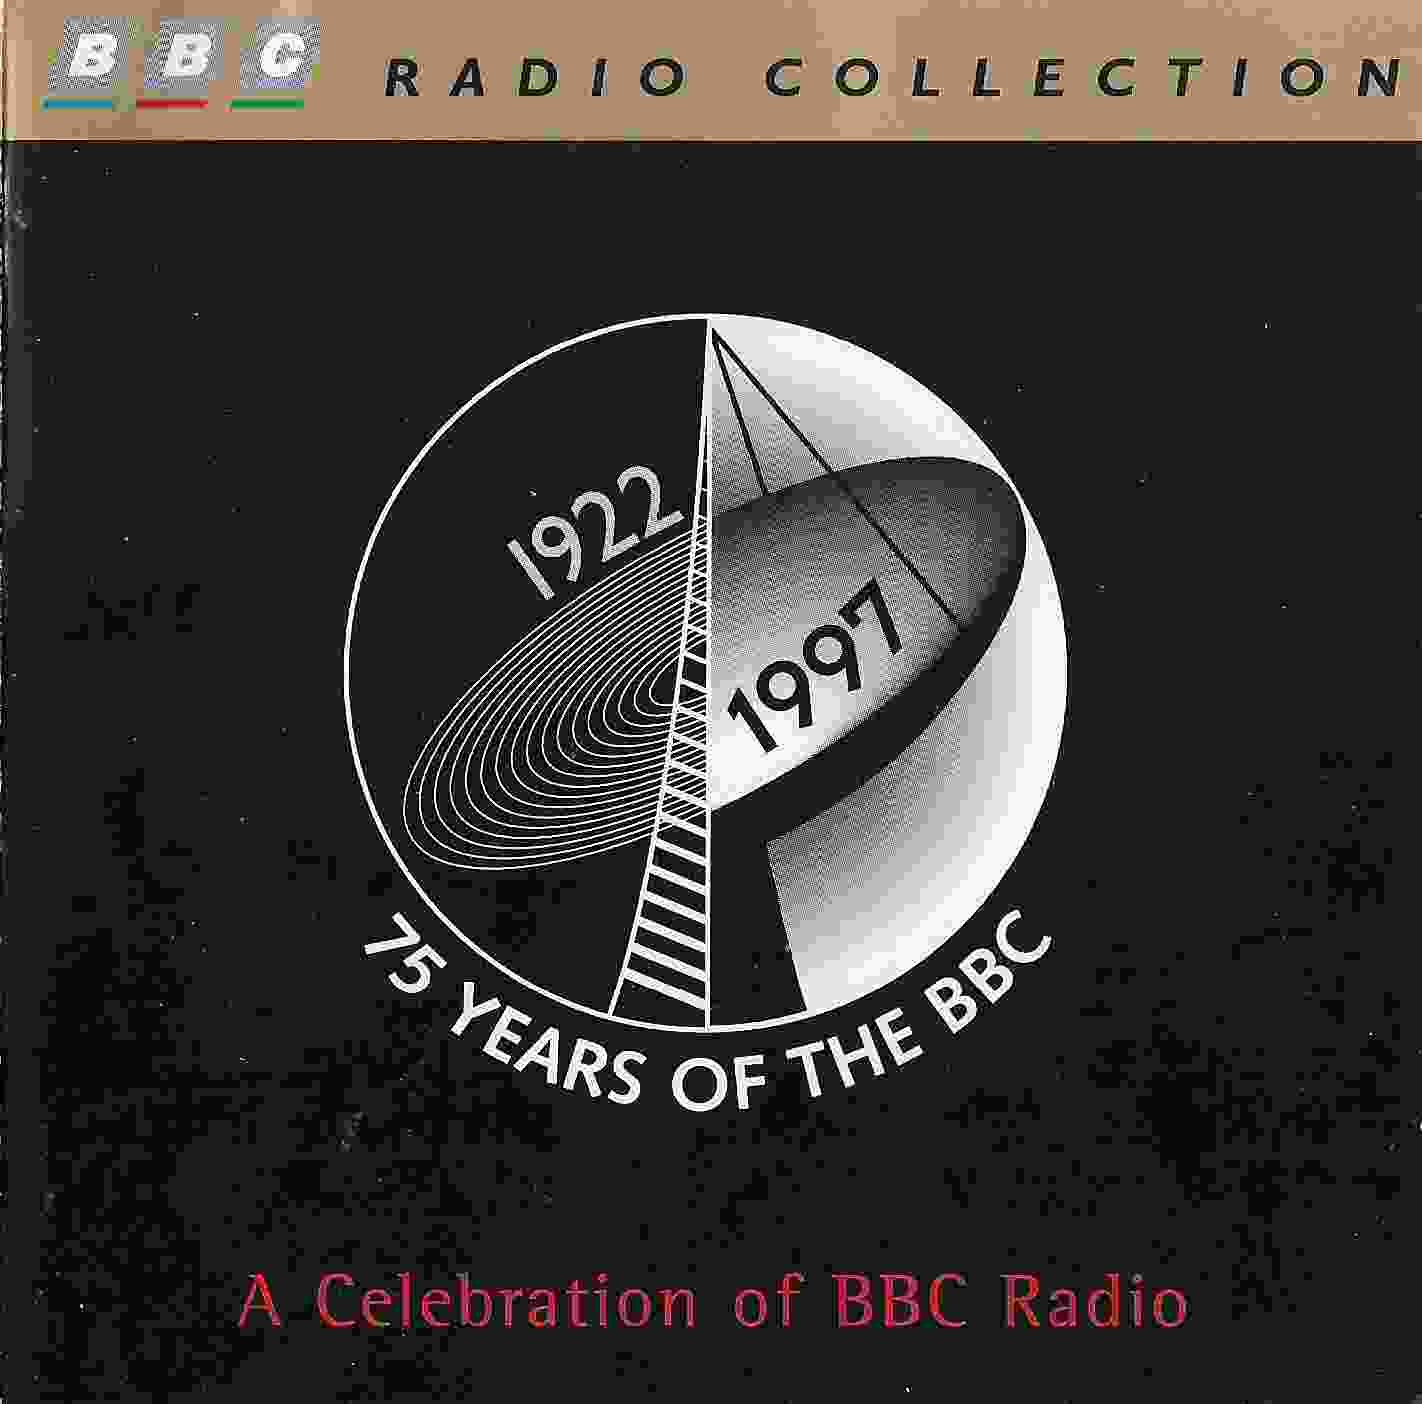 Picture of ZBBC 2038 CD 75 years of the BBC - A celebration of BBC Radio by artist Various from the BBC cds - Records and Tapes library